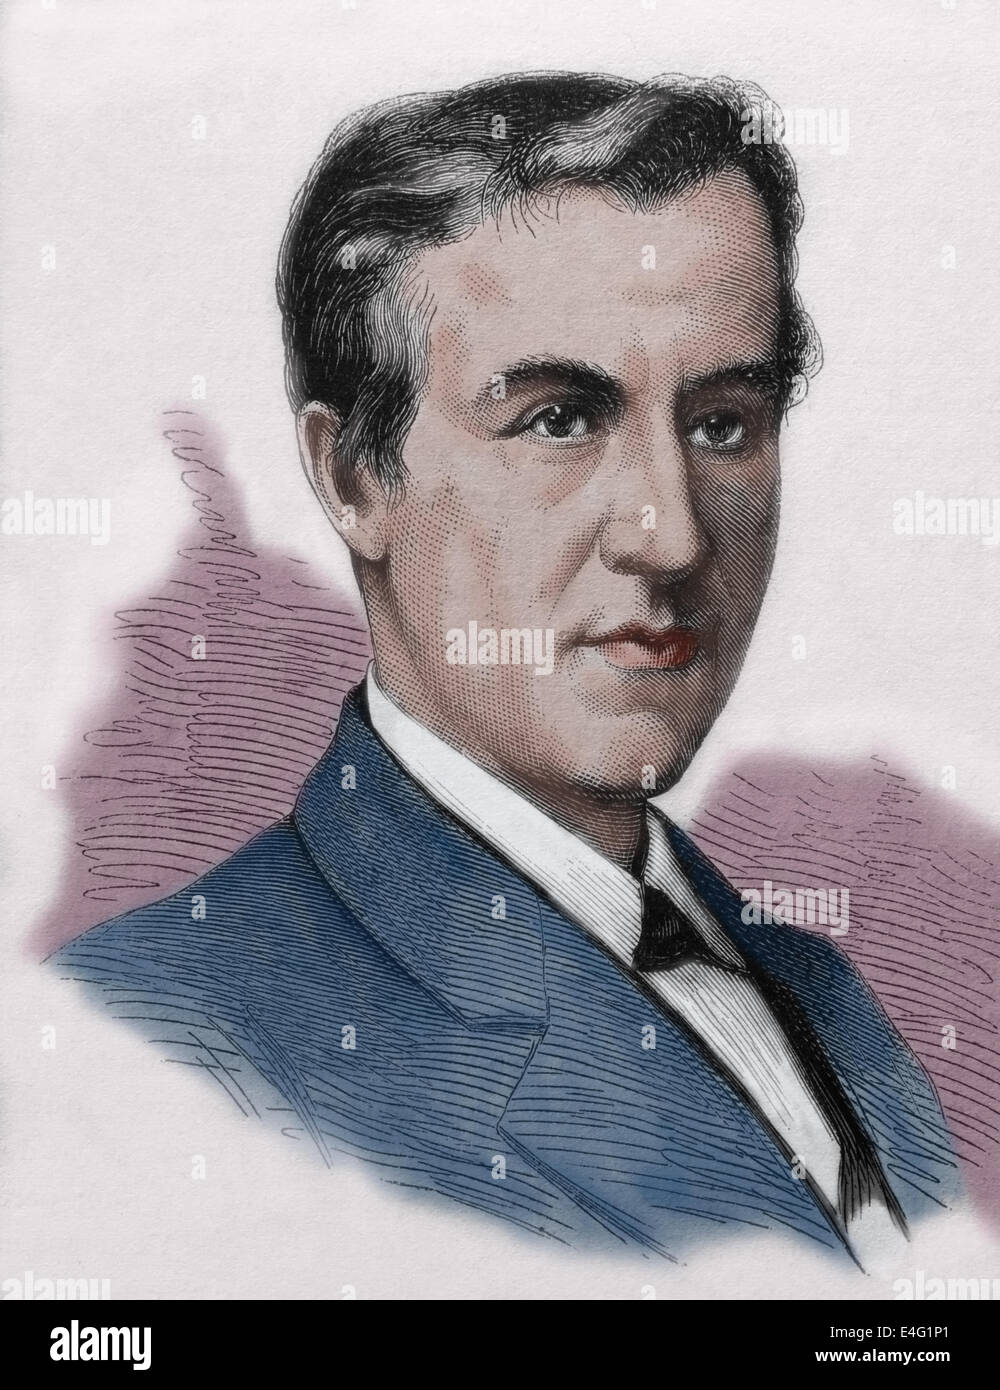 Thomas Alva Edison (1847 Ð 1931). American inventor and businessman. Engraving by Tourfaut, 1980, published in Spain. Color. Stock Photo